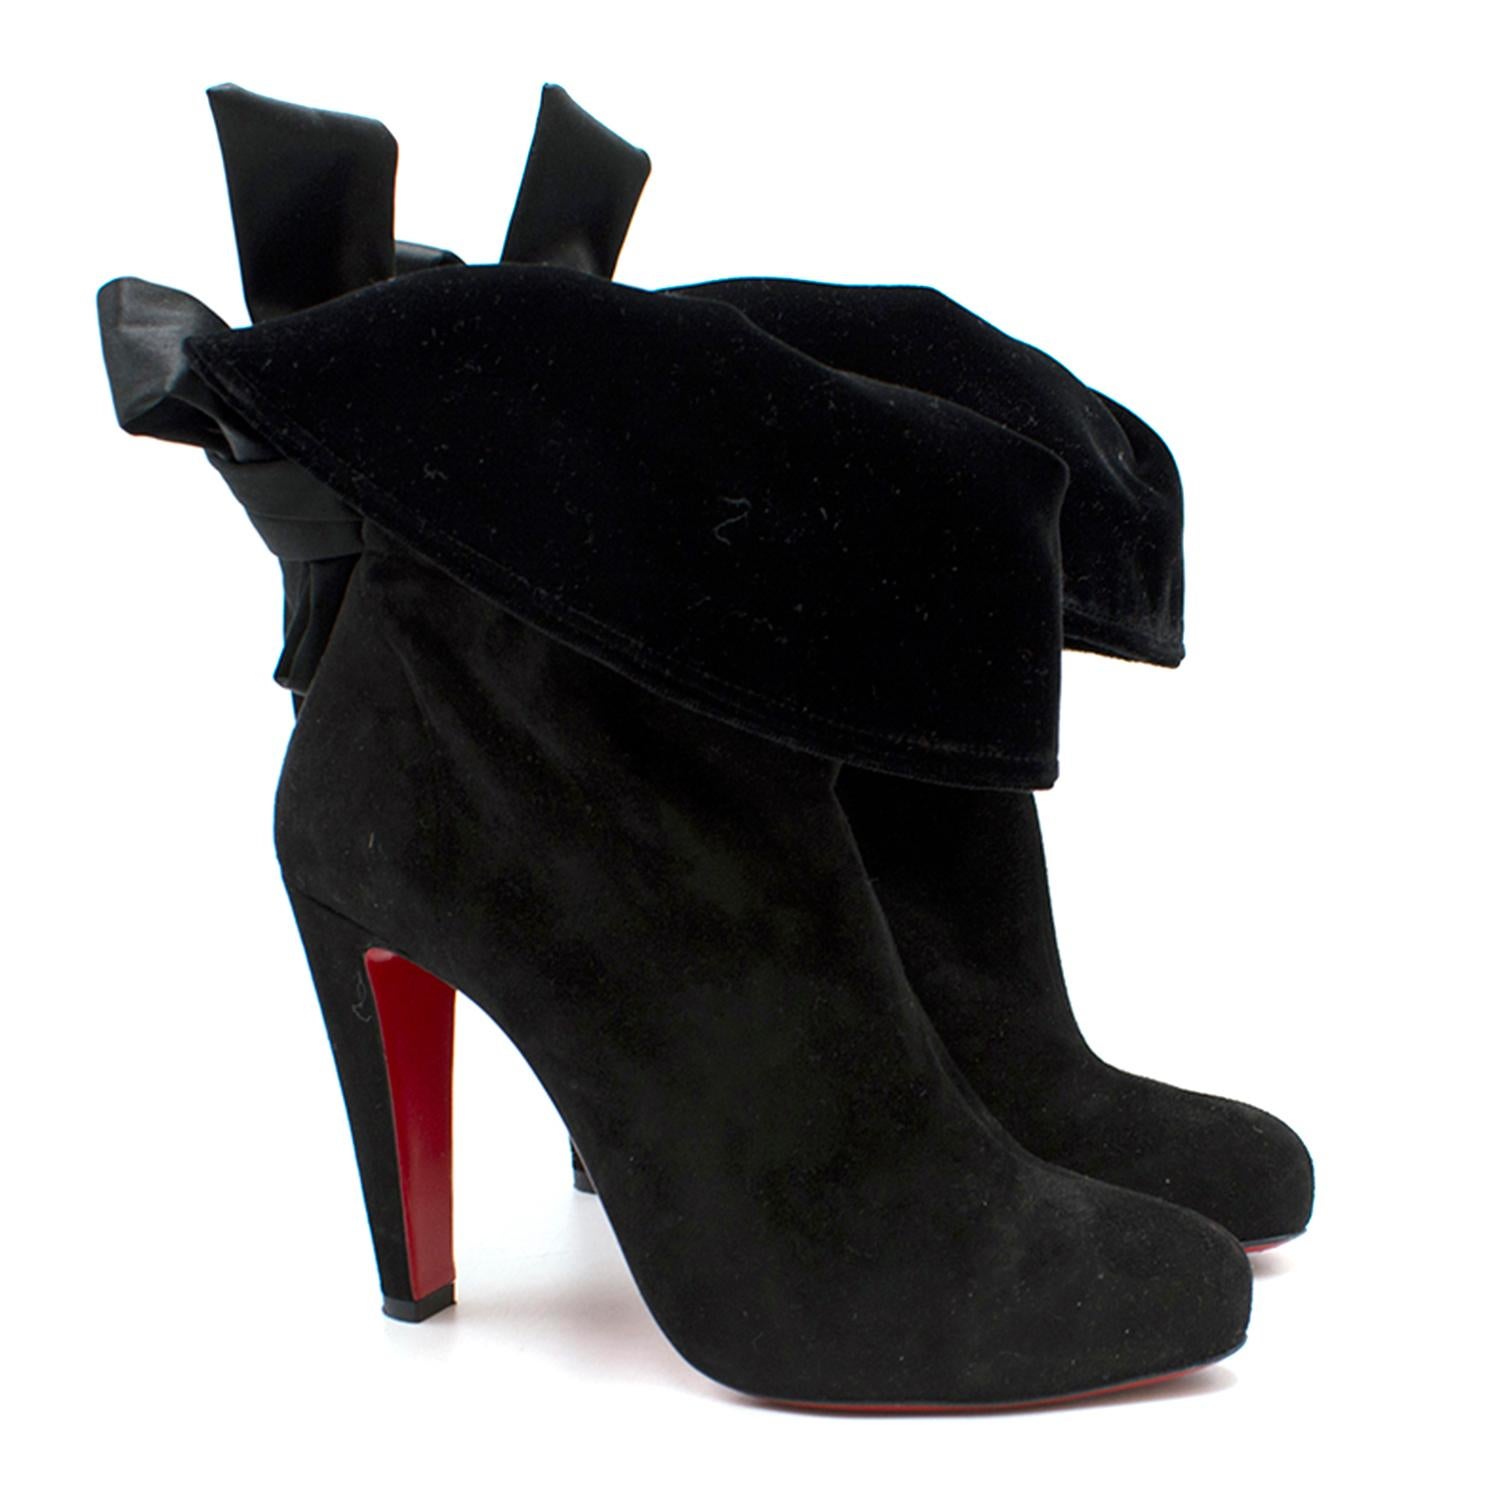 Christian Louboutin Kristofa 100 Suede Ankle Boots

- Current season
- Soft velvet cuff
- Elasticated ankle
- Large satin black ribbon fastening
- Rounded, pointed toe
- Iconic red Louboutin soles
- High heel

Please note, these items are pre-owned